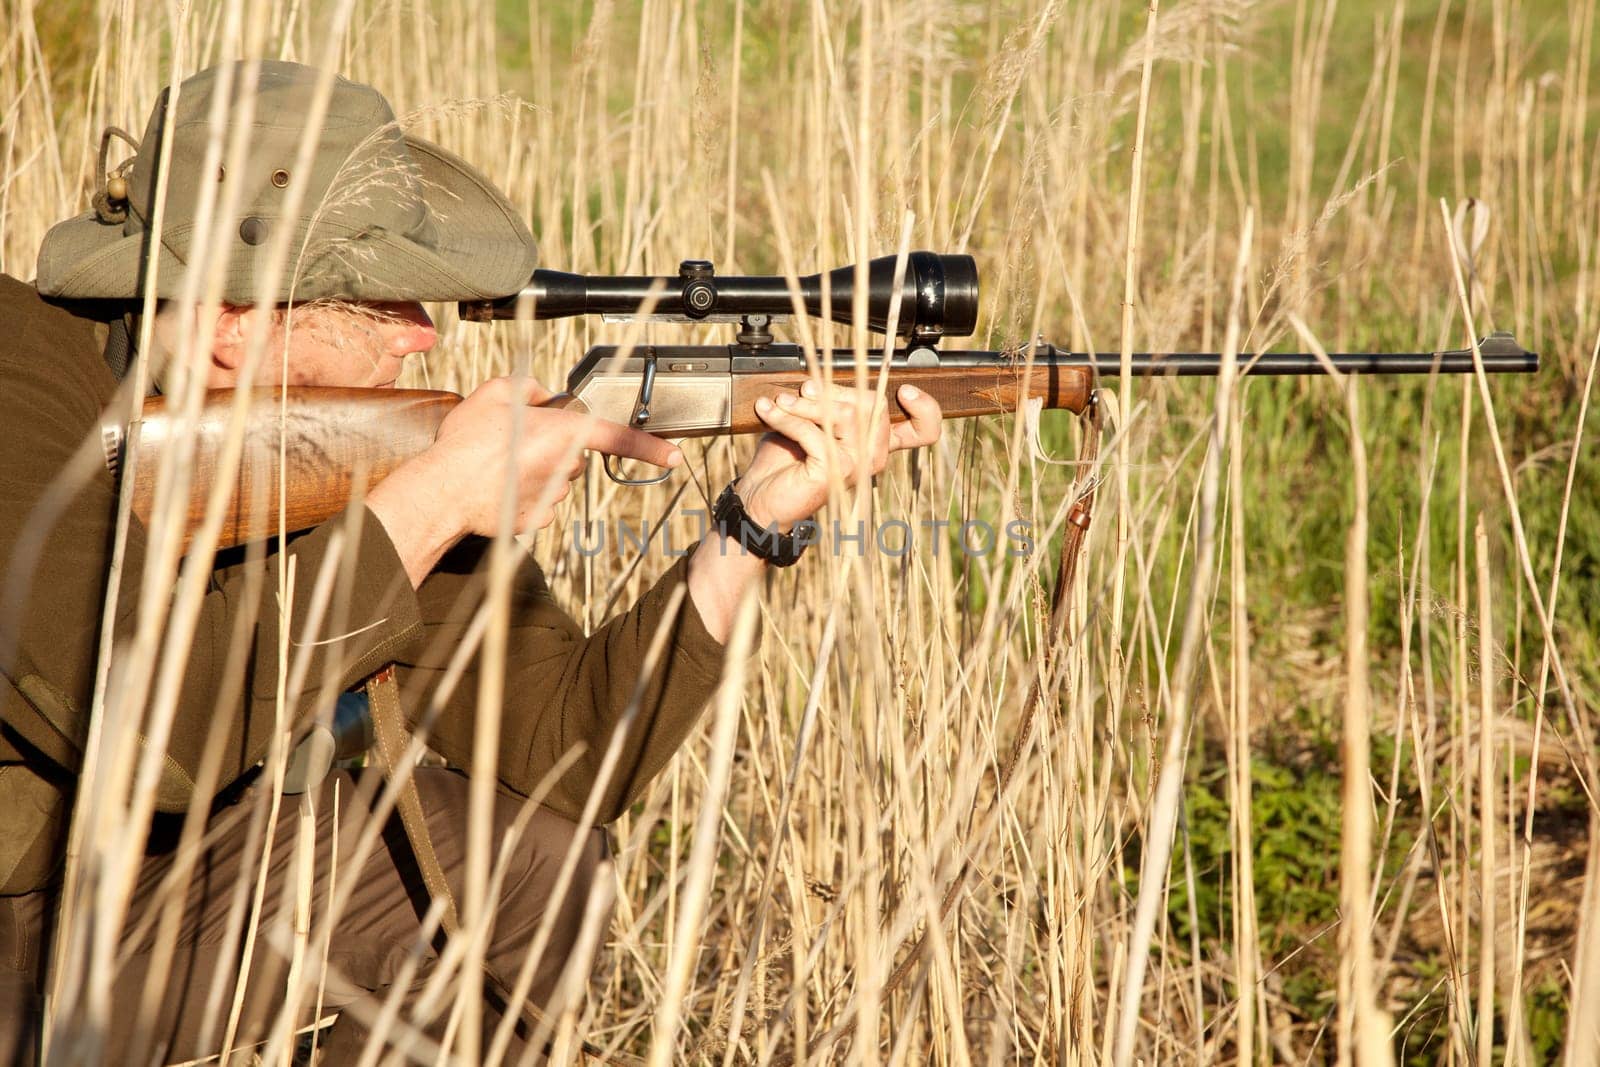 Nature, wildlife and male hunter with a shotgun while in camouflage shooting in outdoor field. Grass, safari and man hunting animals with rifle weapon hiding in plants to shoot target in countryside